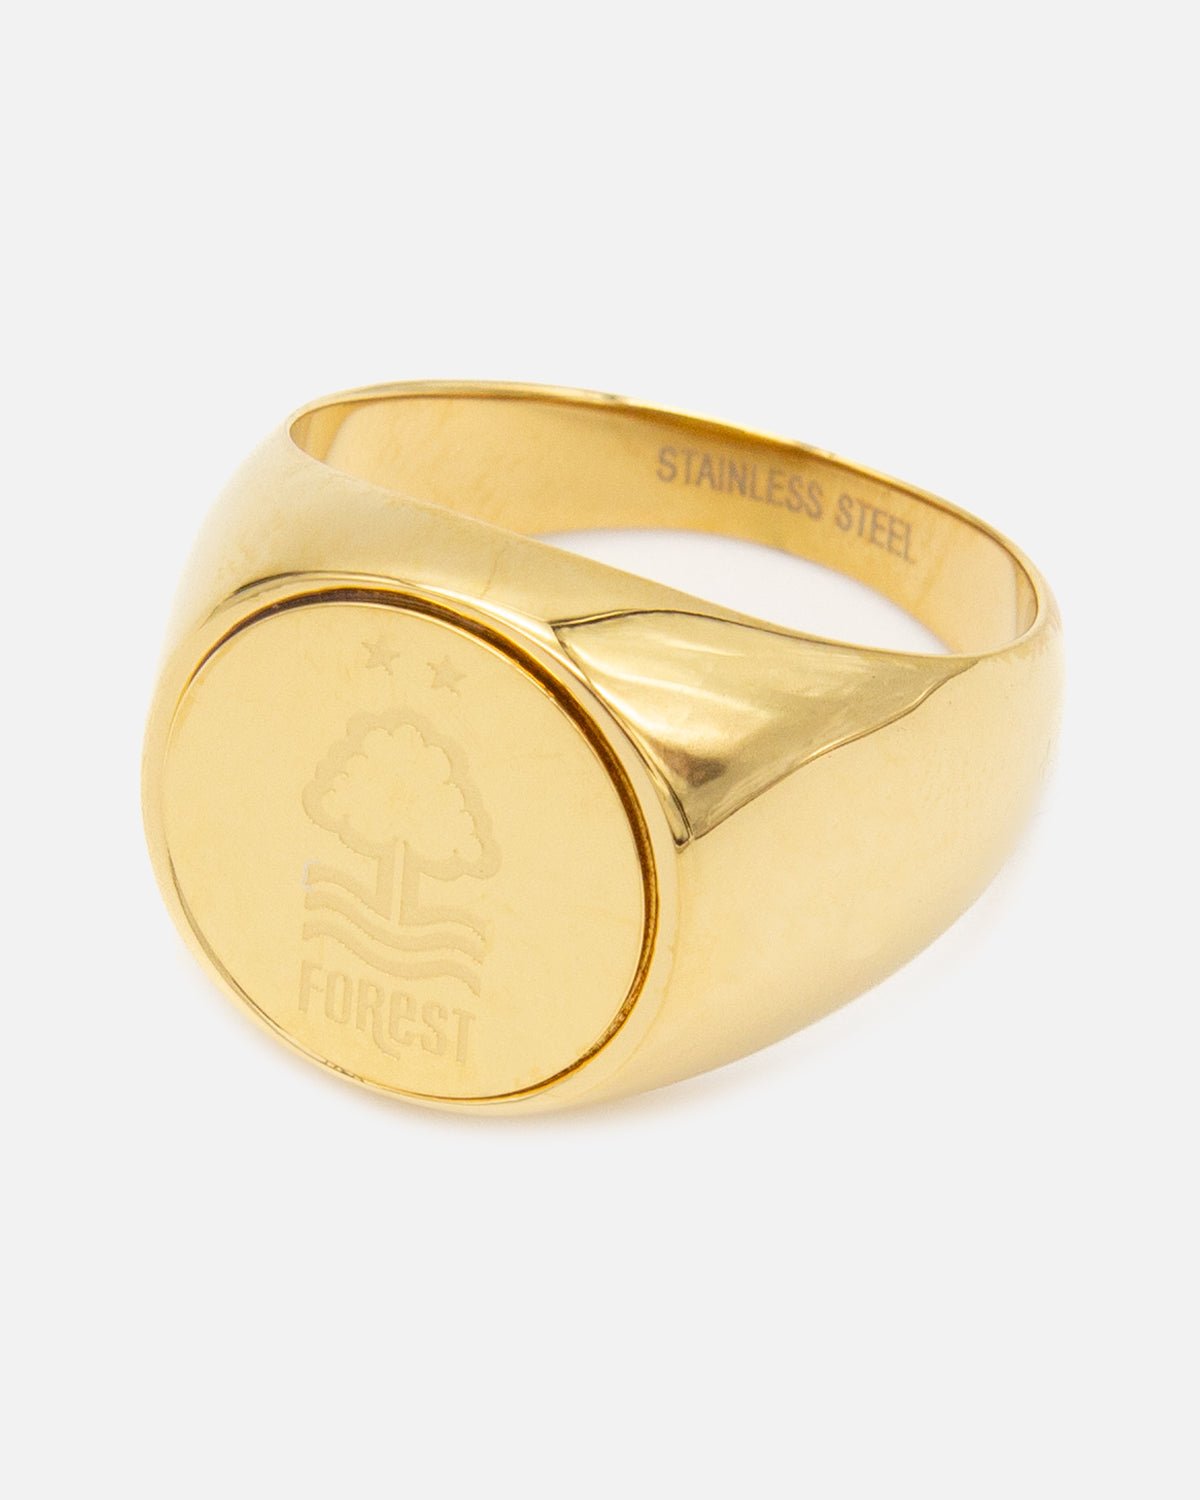 NFFC Gold Plated Signet Ring - Nottingham Forest FC